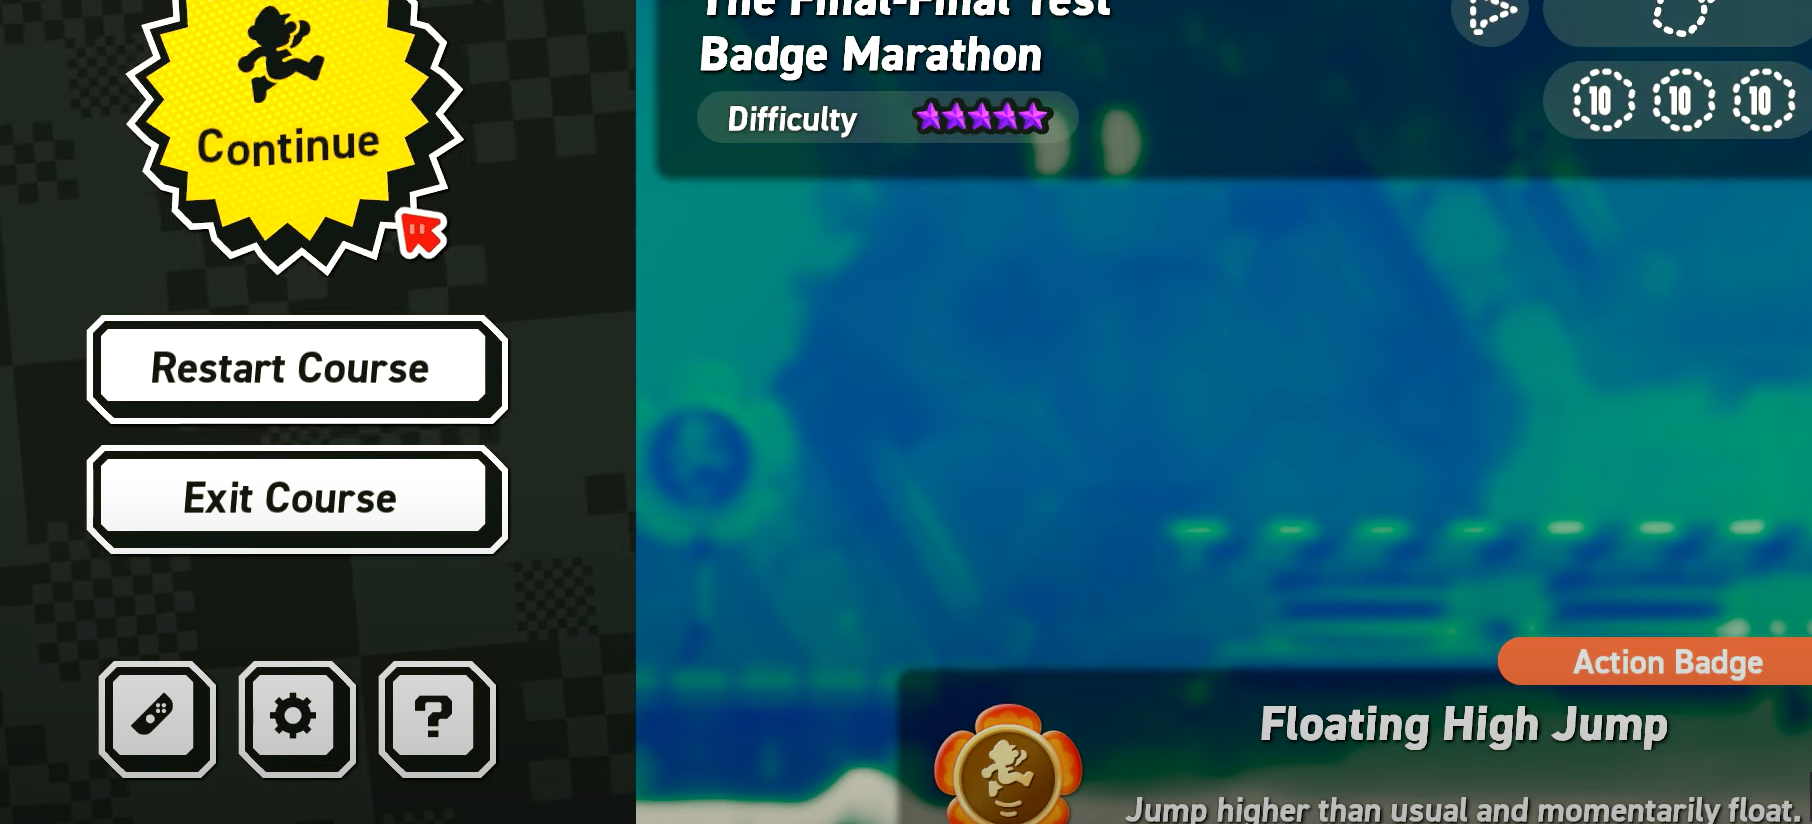 Floating High Jump Action Badge